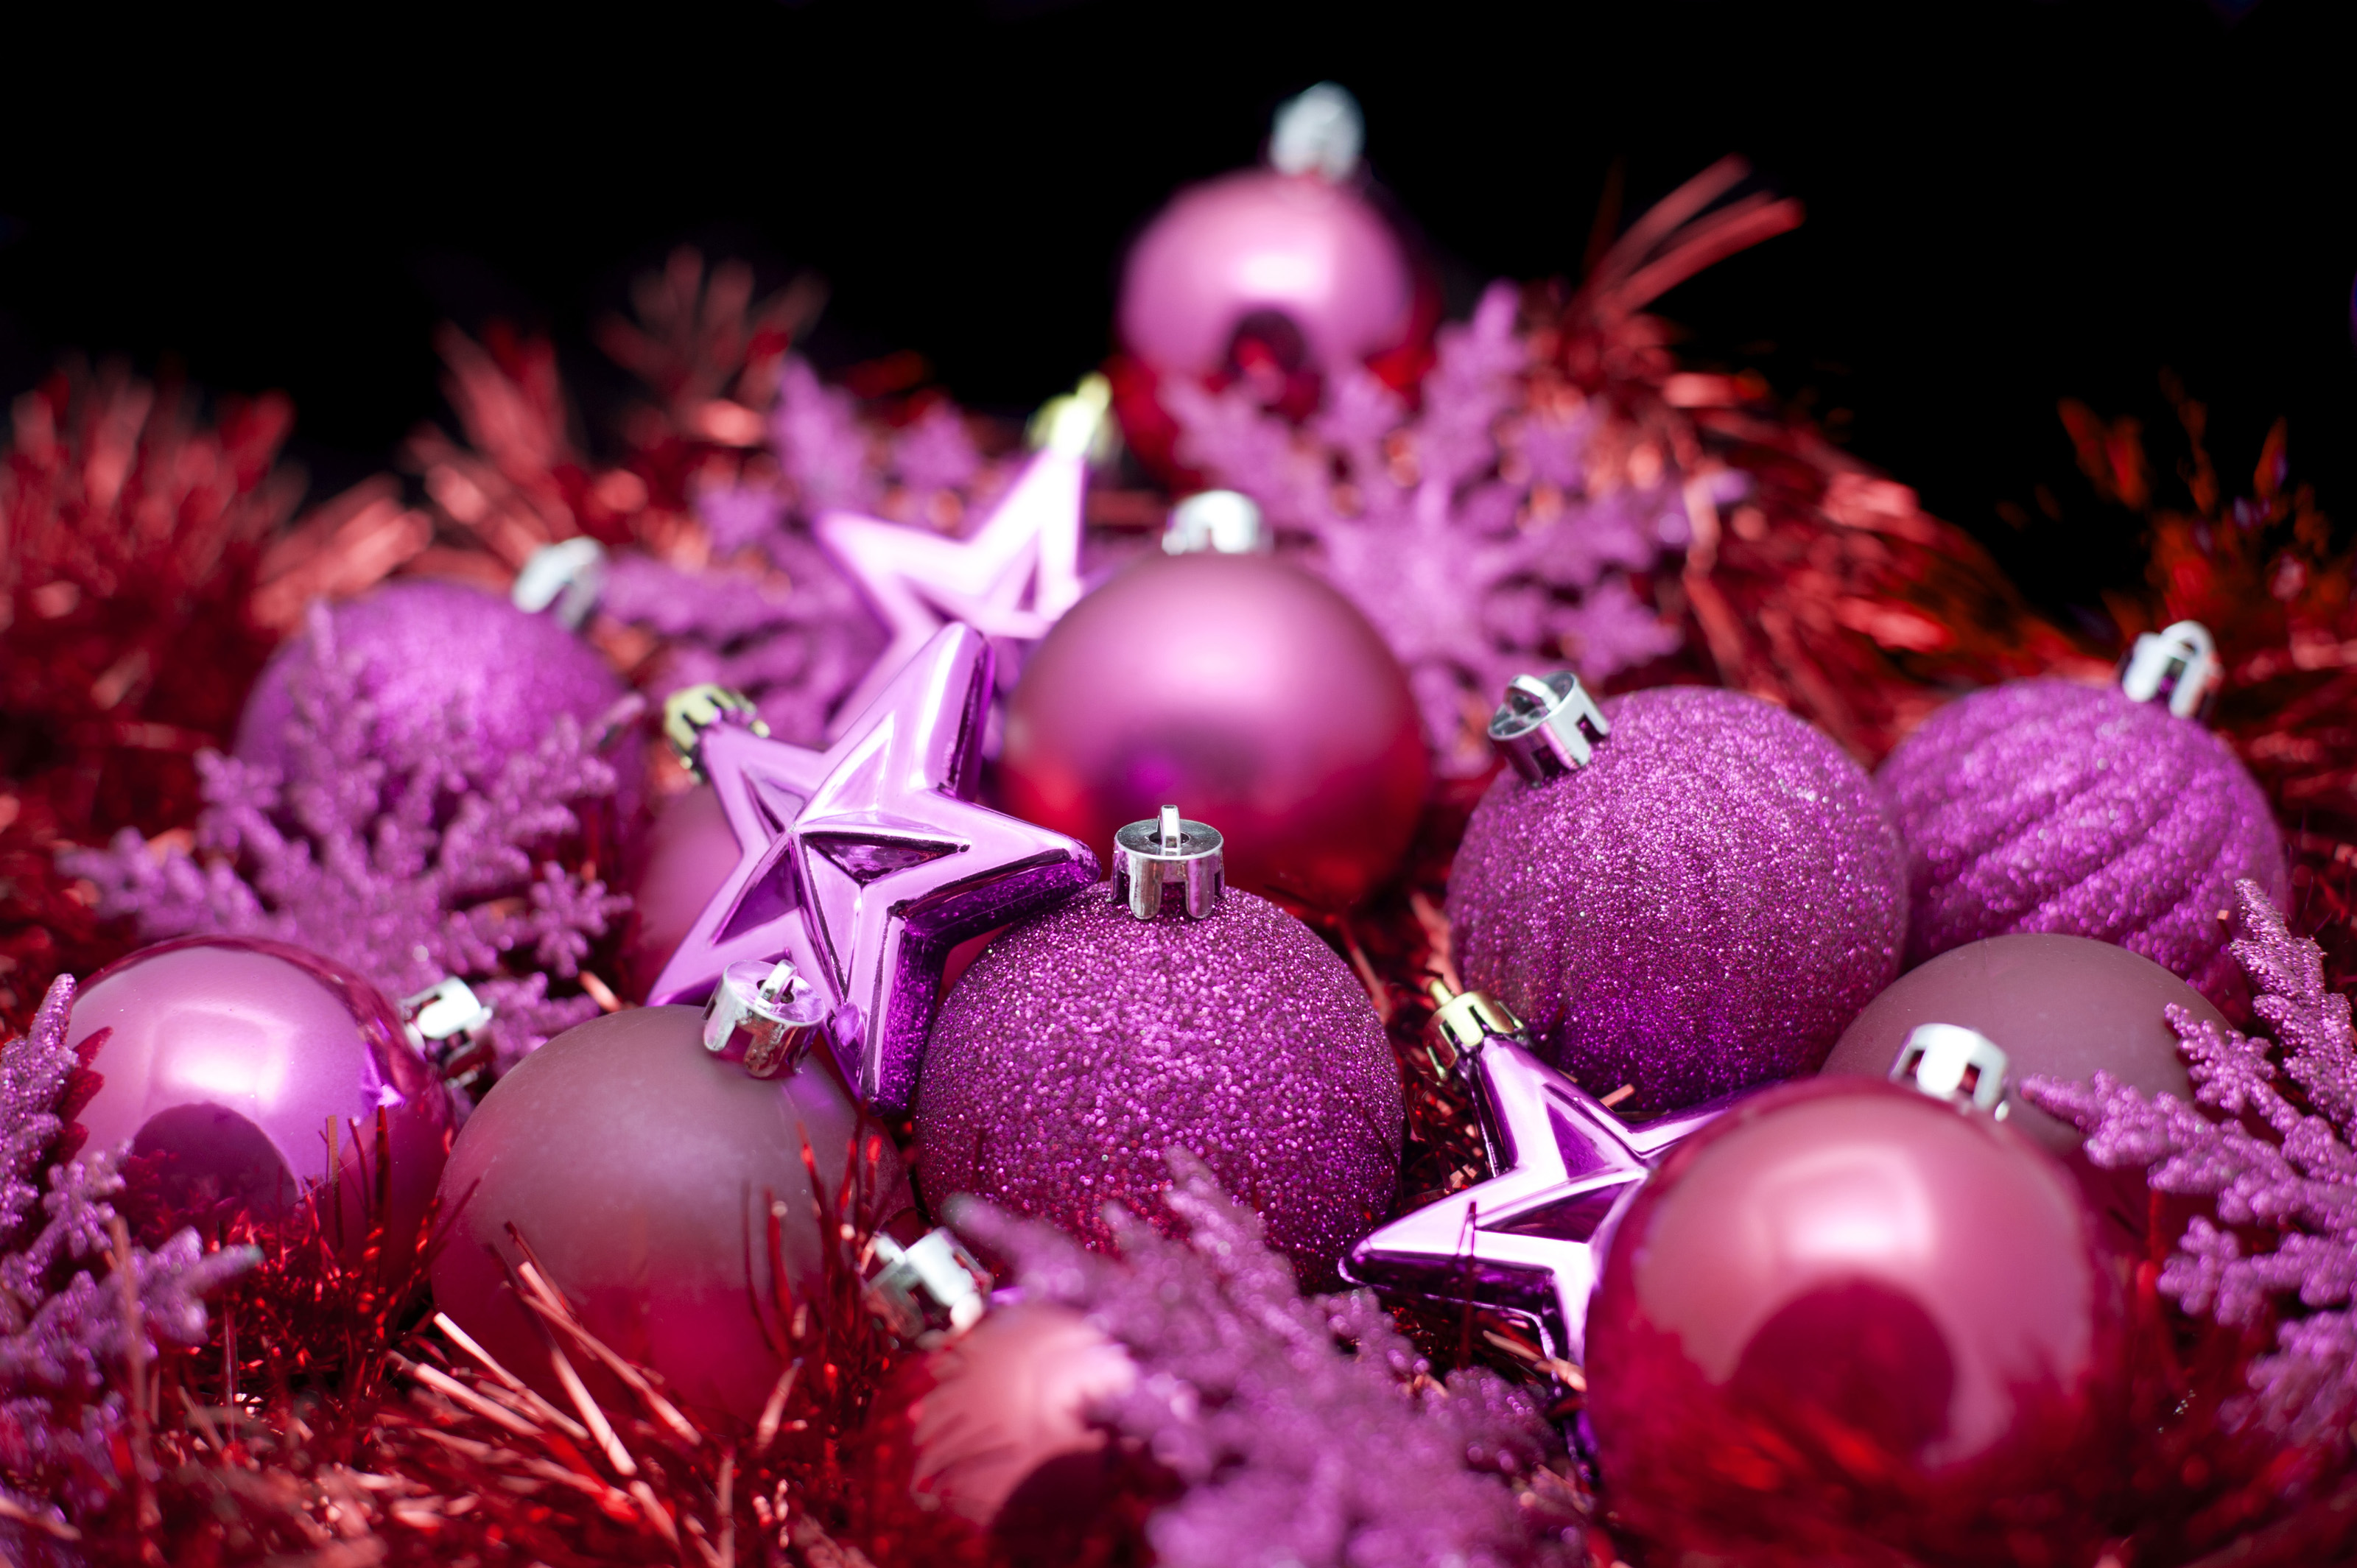 Background Of Pink Christmas Decorations 6334. Stockarch Free